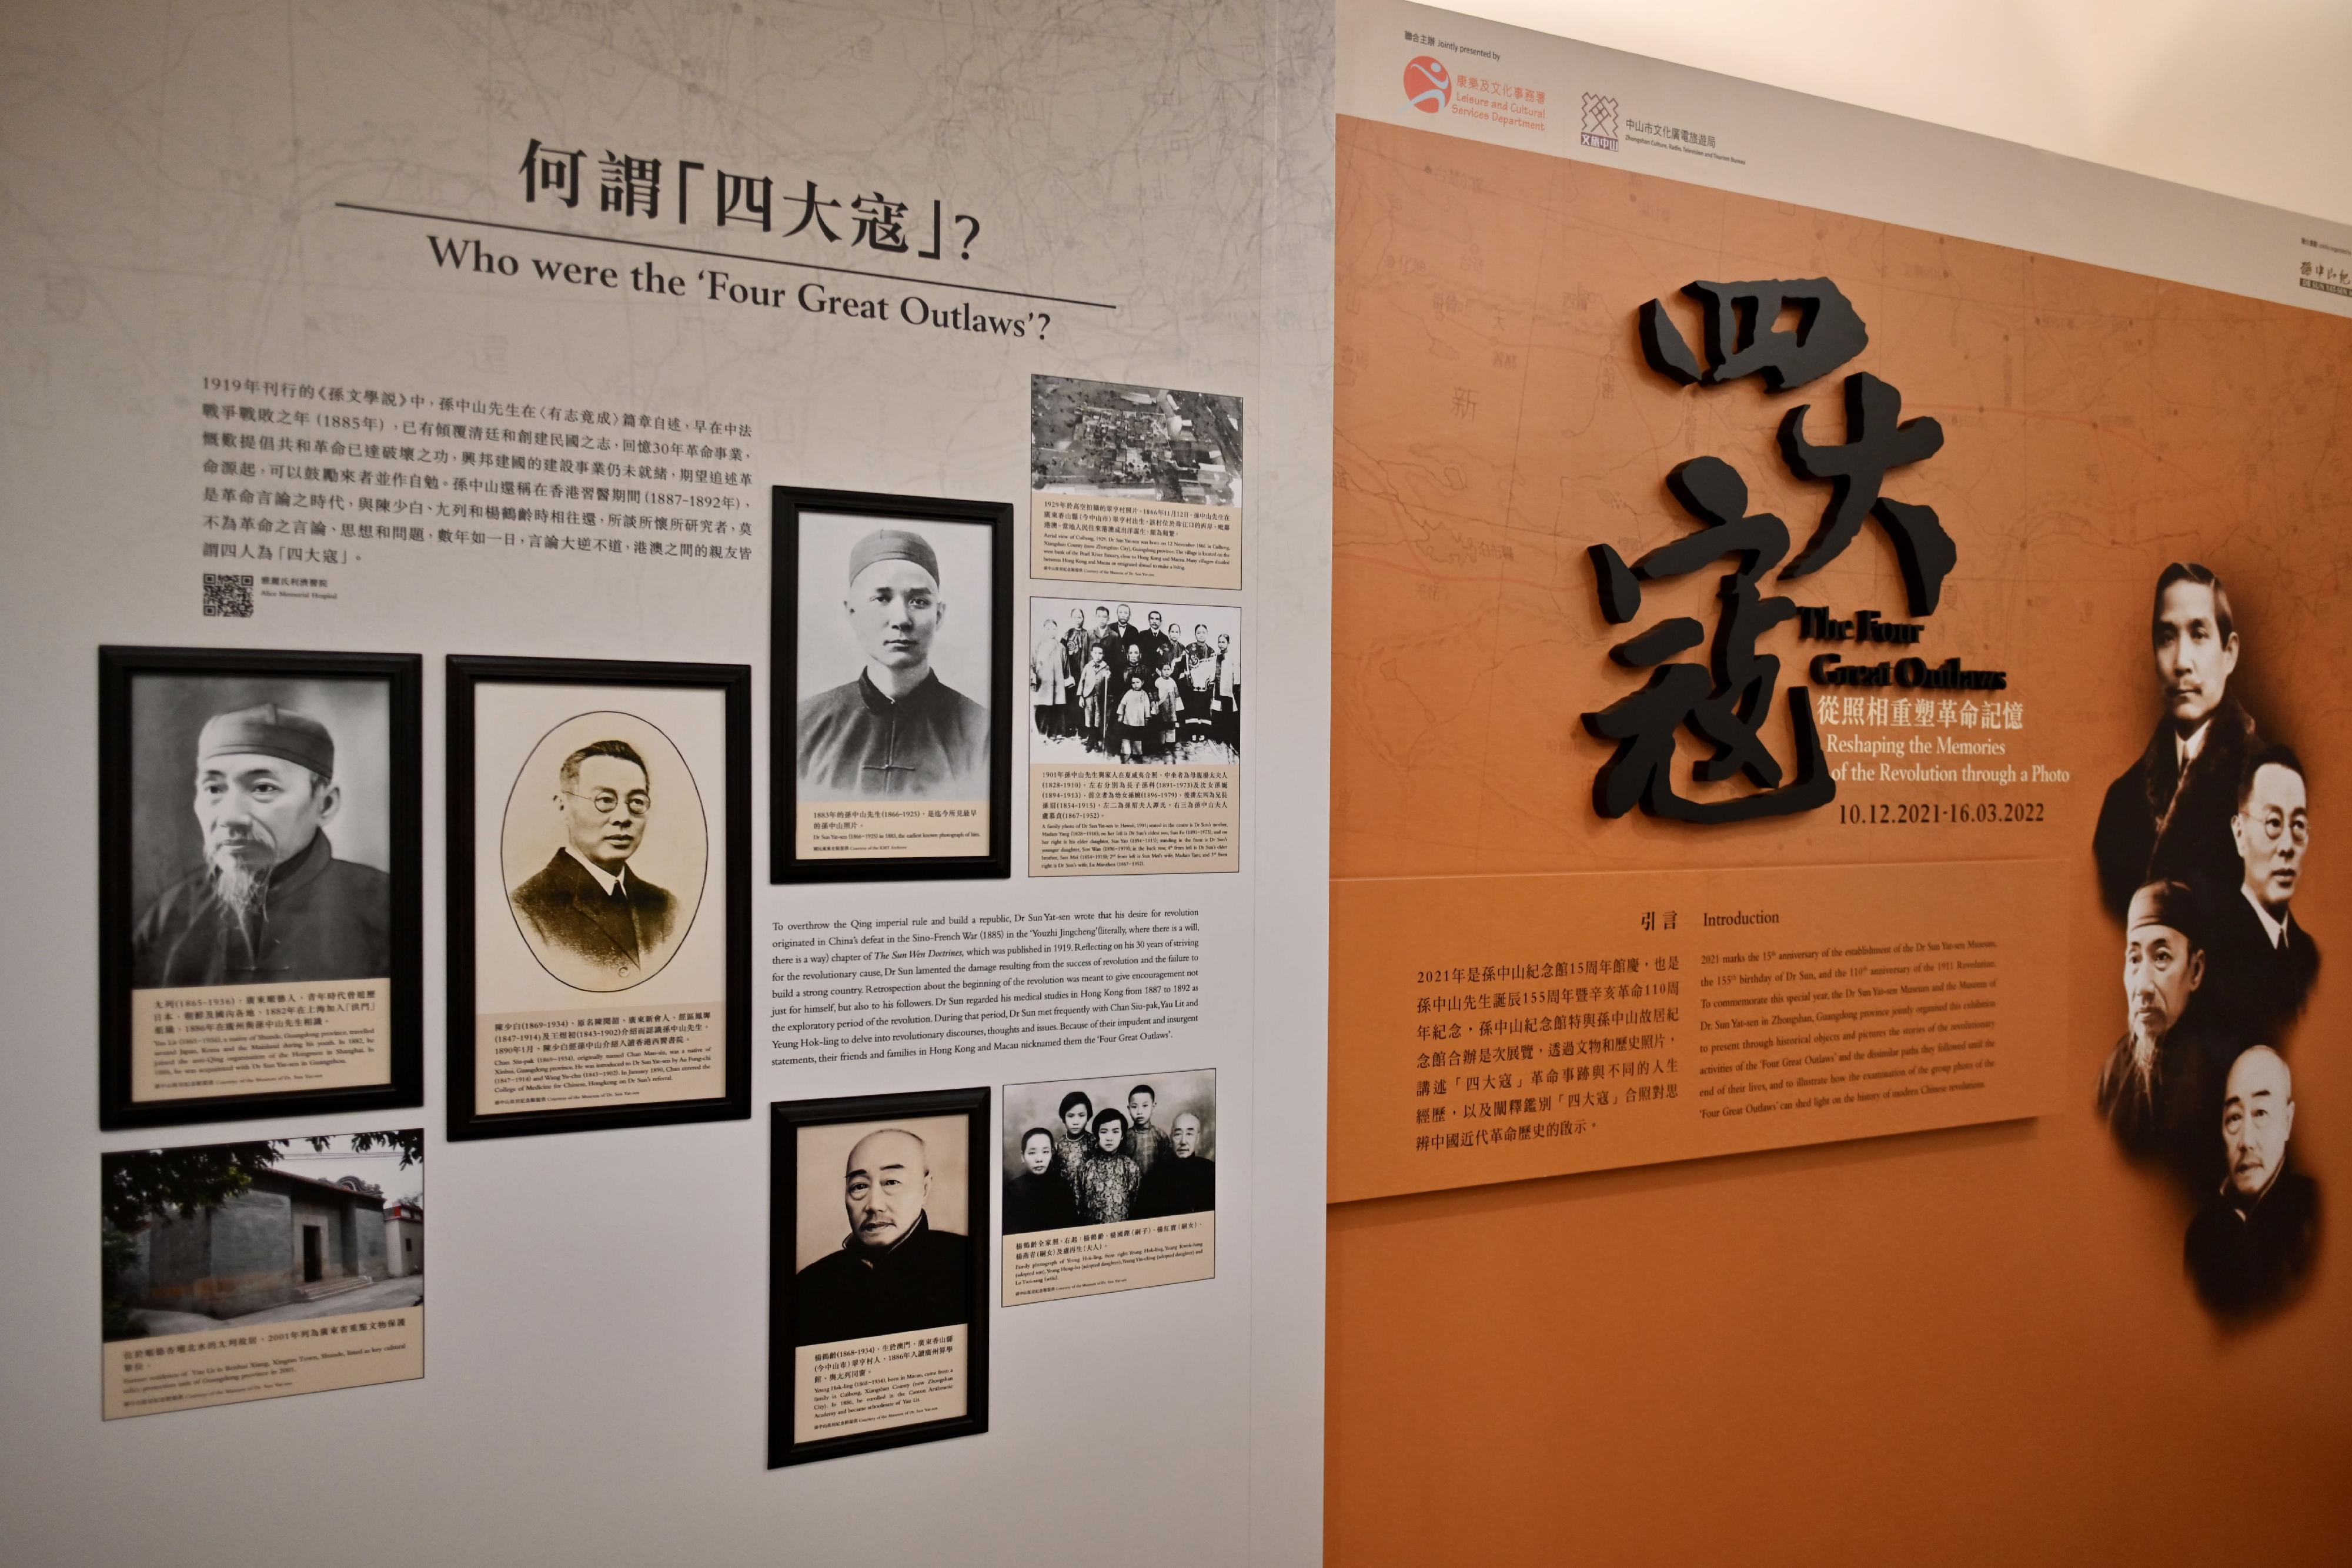 The Dr Sun Yat-sen Museum will hold the thematic exhibition "The Four Great Outlaws - Reshaping the Memories of the Revolution through a Photo" from tomorrow (December 10), displaying over 50 exhibits and historical pictures.